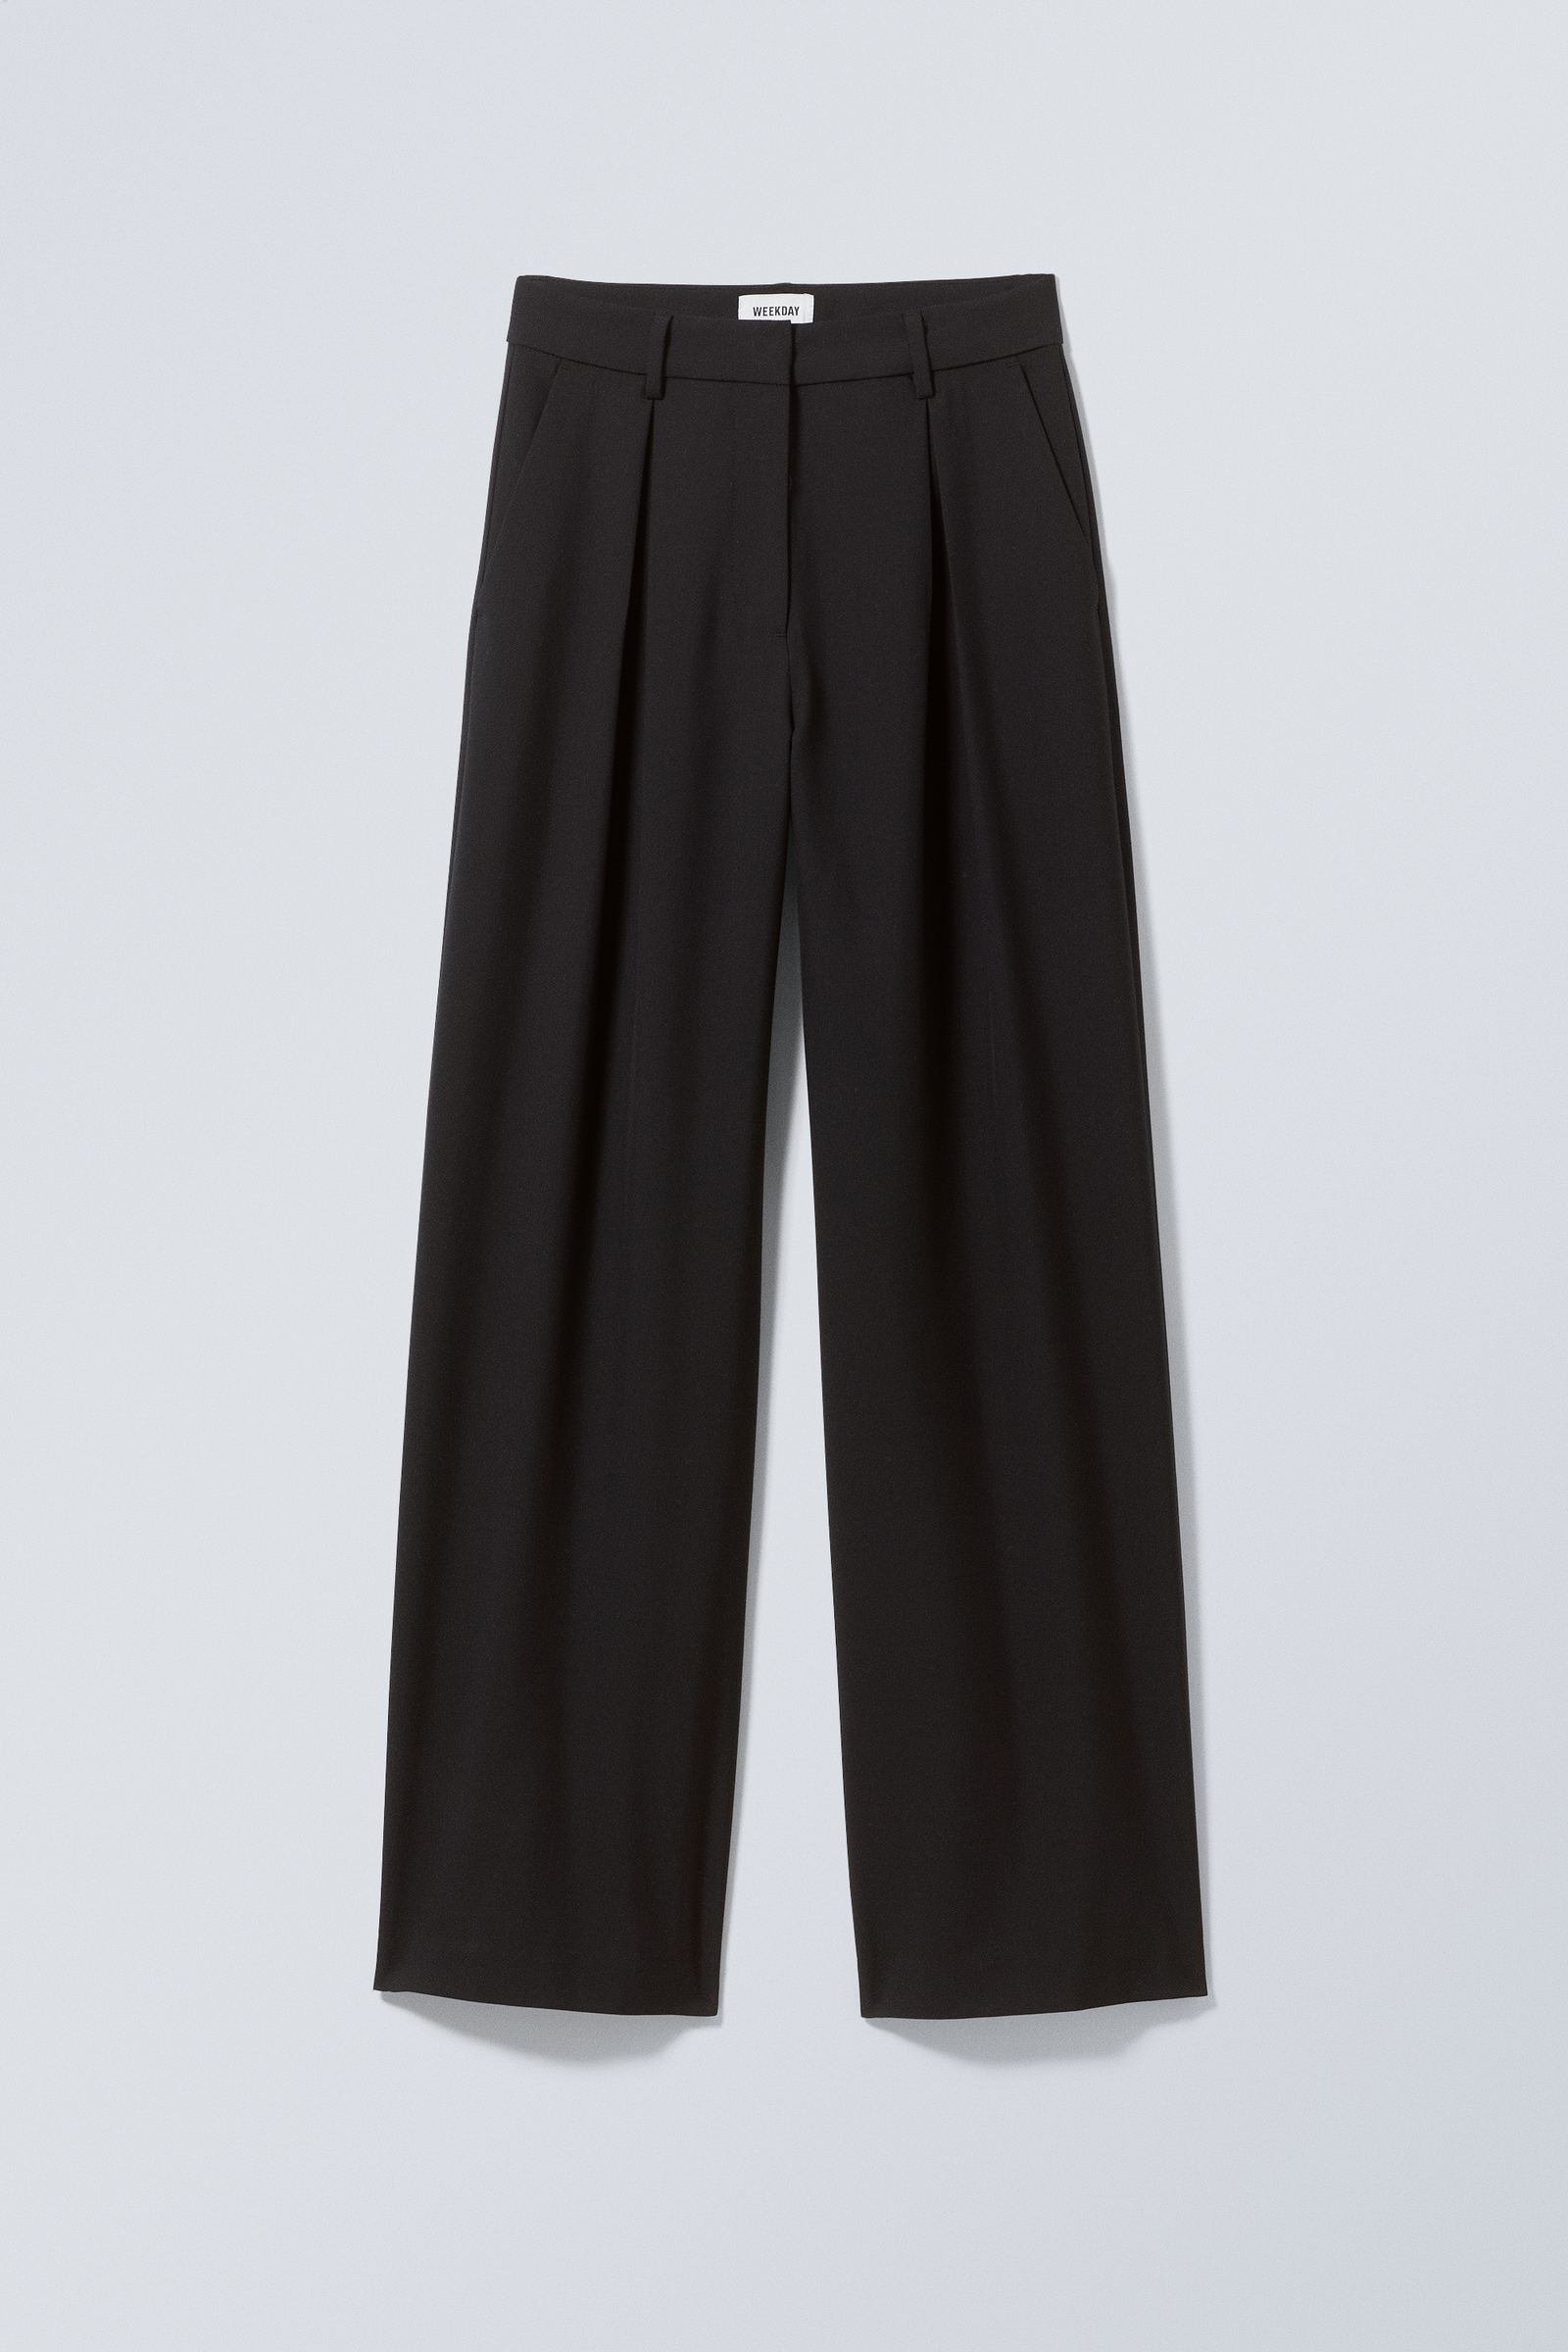 #272628 - Lilah Tailored Trousers - 1